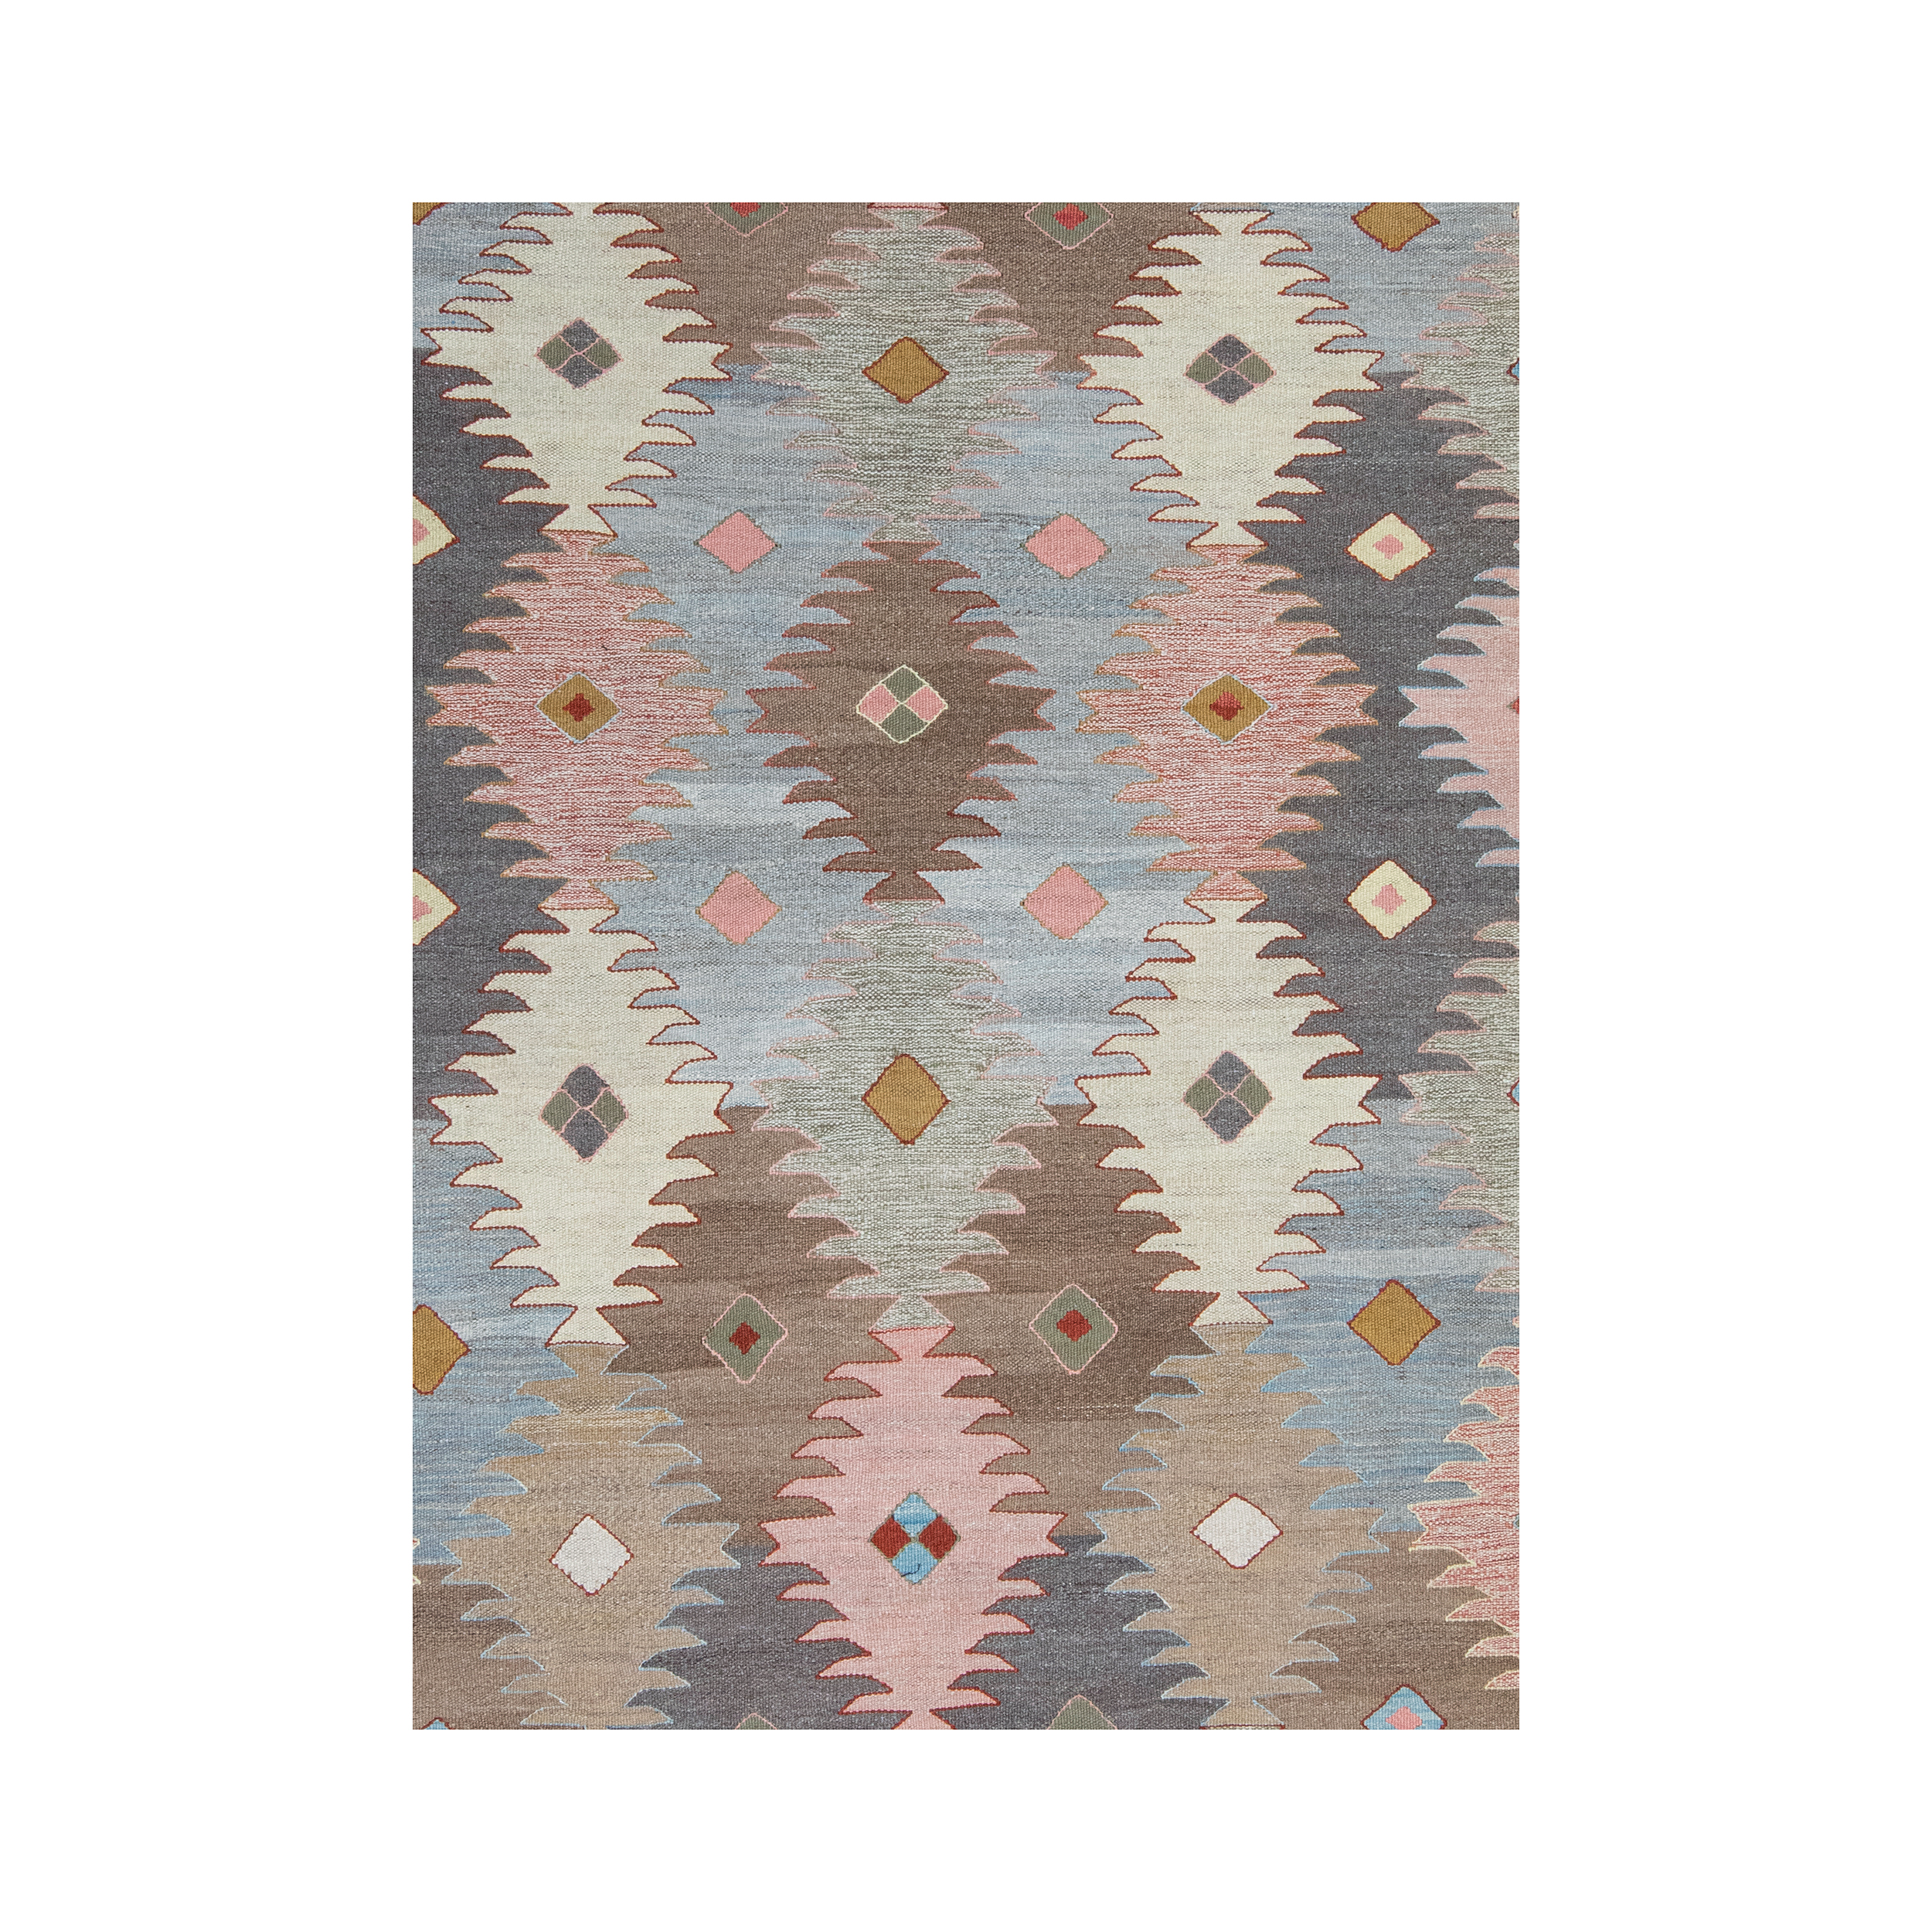 Kalach flatweave rug resembles the rare and collectible antique Khalaj kilim by a renowned Turkish group that were produced in the 19th century and earlier.  